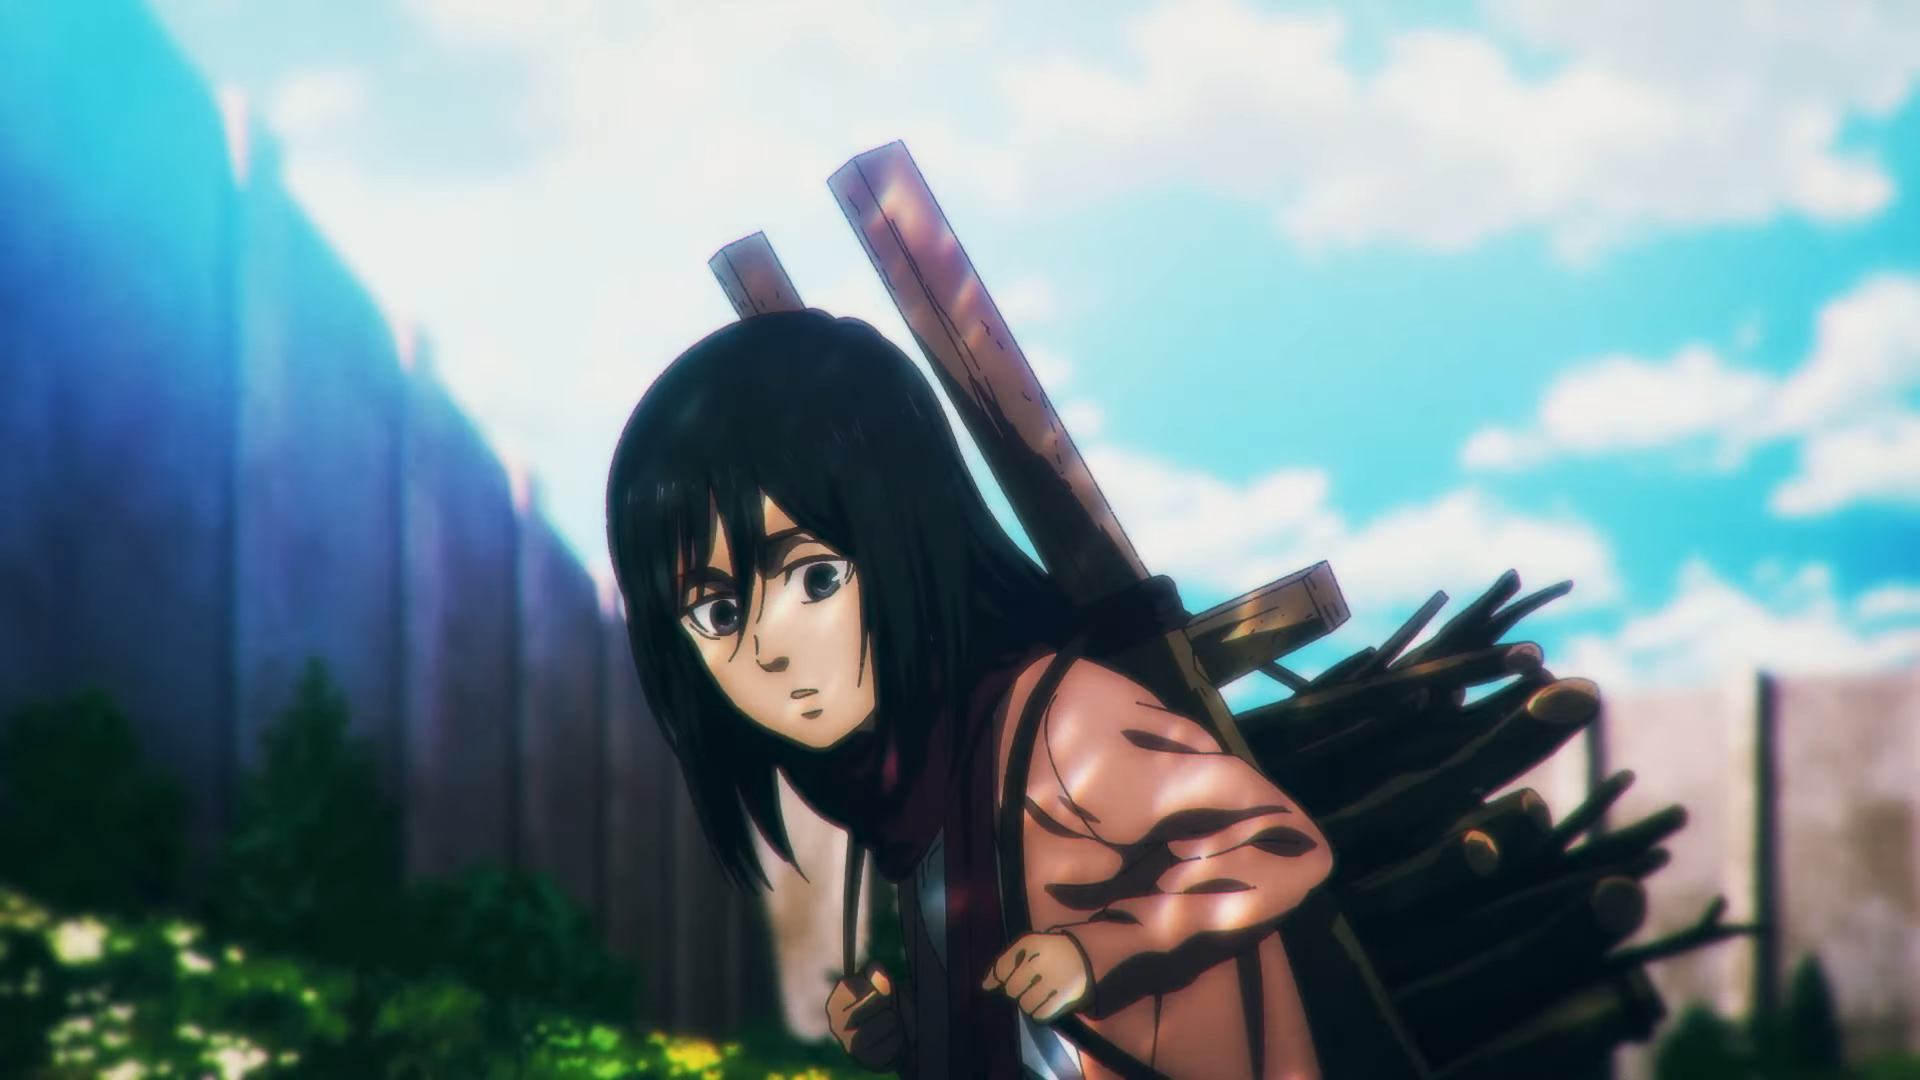 Attack on Titan PART 3 OFFICIAL Update!